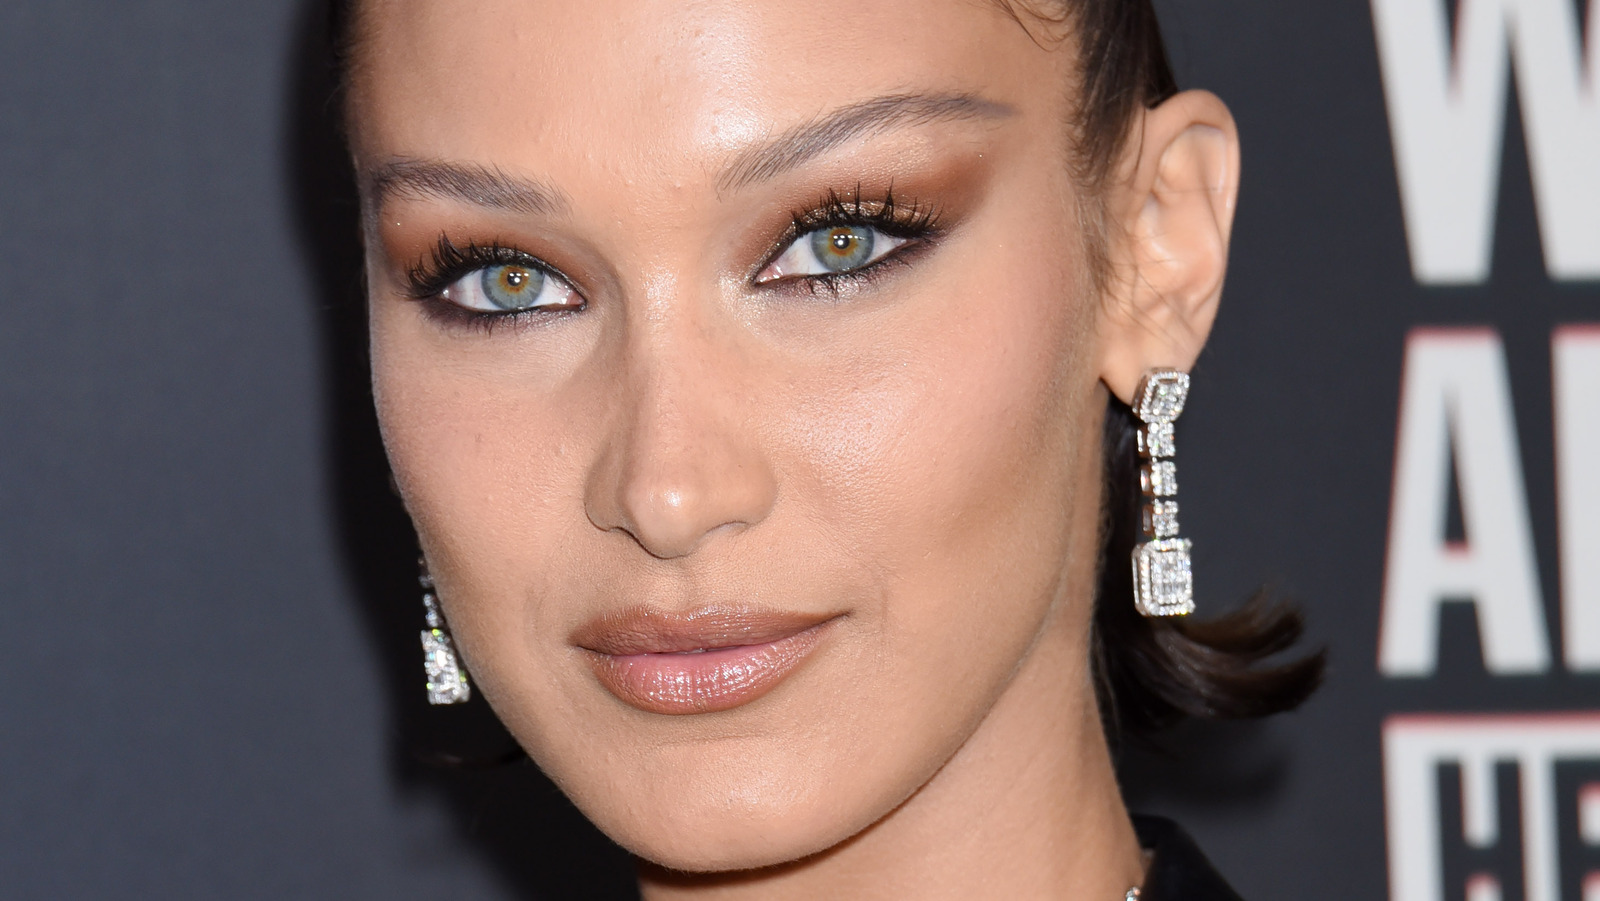 This Is Who Fans Want Bella Hadid To Date Next